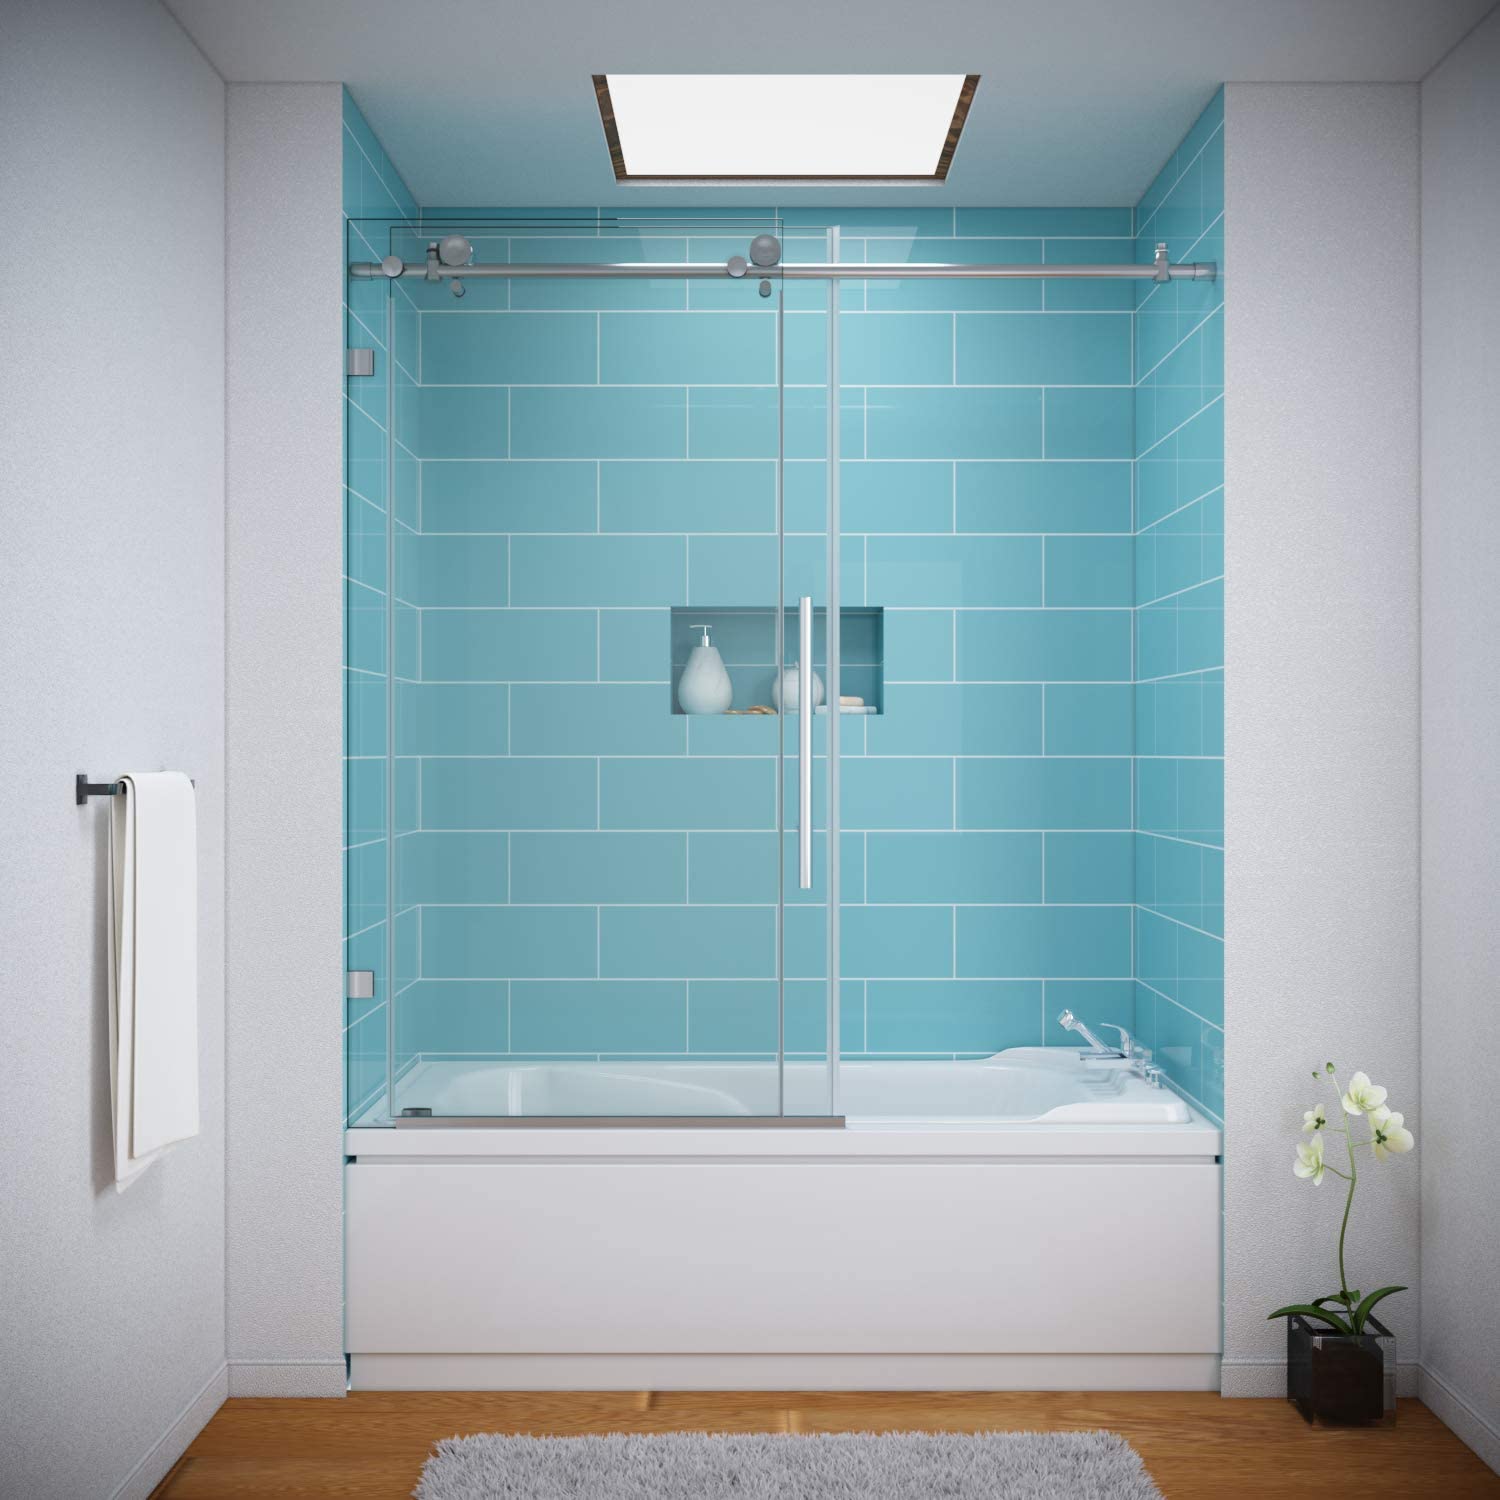 Modern bathroom featuring a frameless glass shower enclosure with turquoise tiles and a minimalistic design.